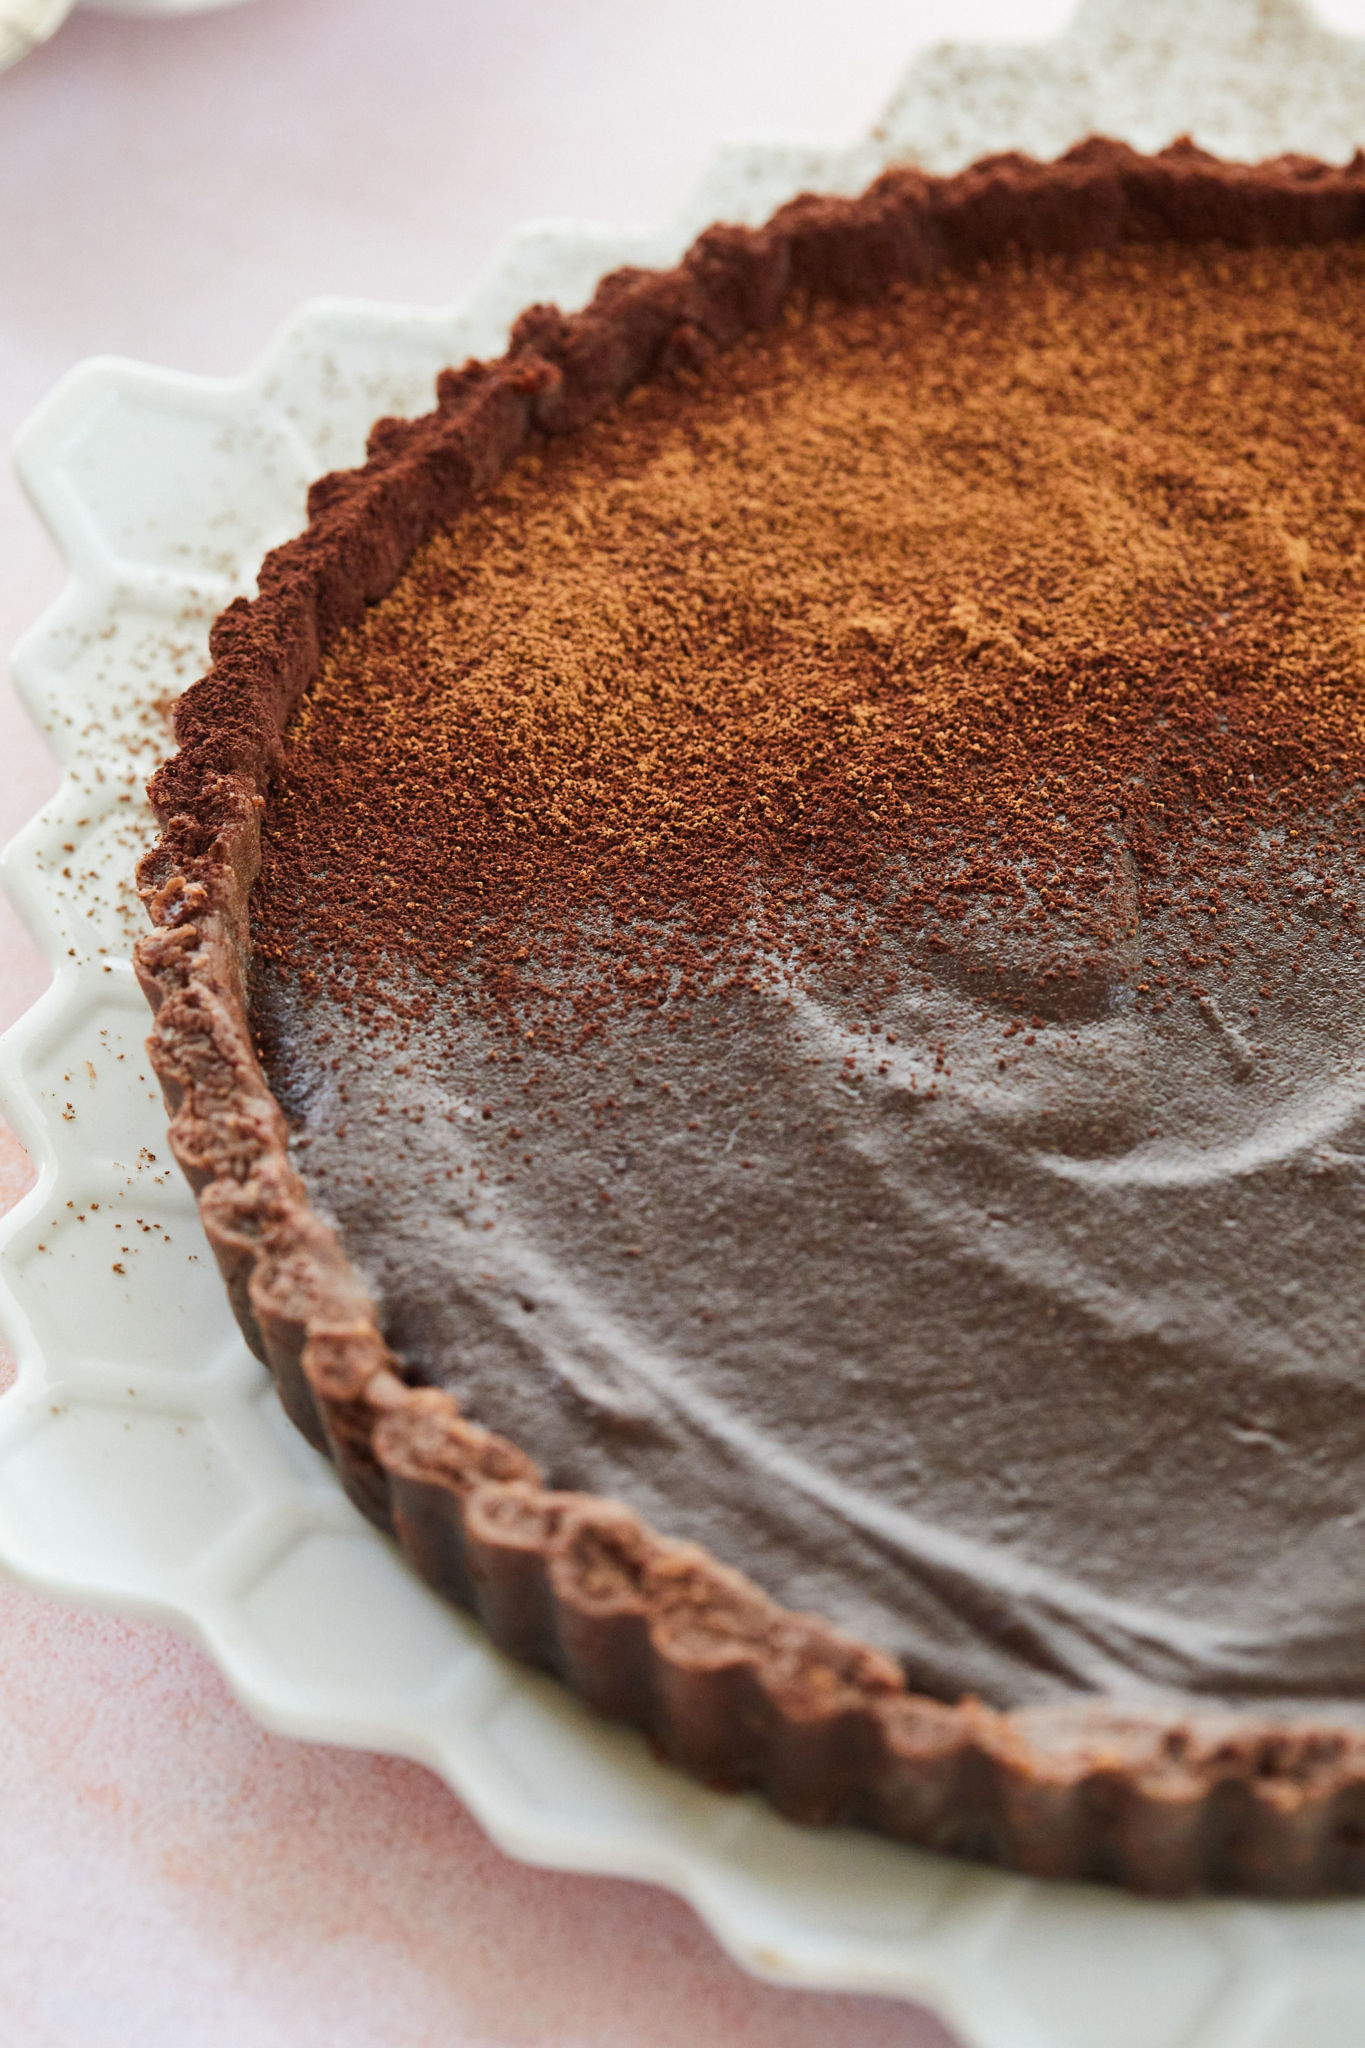 My Chocolate Tart recipe dusted with cocoa powder.